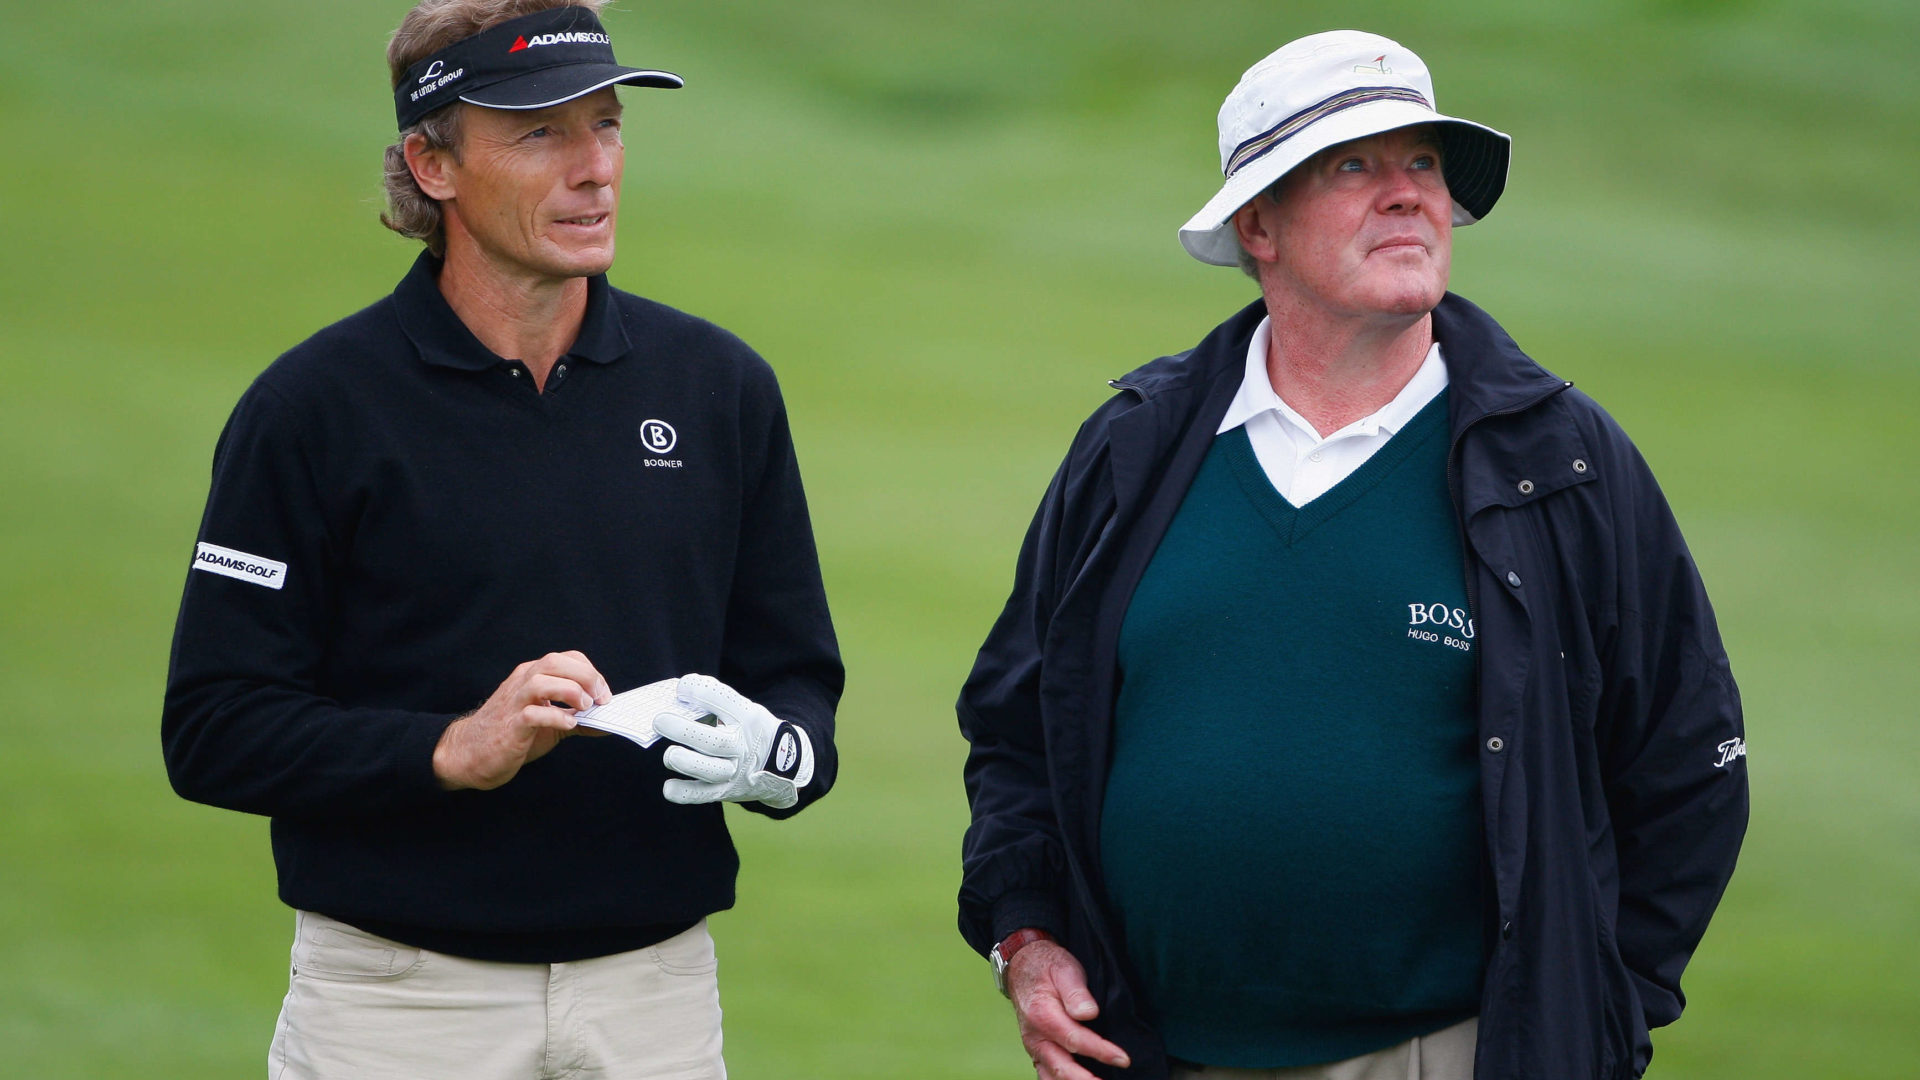 COLOGNE, GERMANY - SEPTEMBER 12: Bernhard Langer of Germany with his coach Willie Hoffmann during the pro - am of The Mercedes-Benz Championship at The Gut Larchenhof Golf Club on September 12, 2007, in Pulheim, near Cologne, Germany. (Photo by Stuart Franklin/Getty Images)